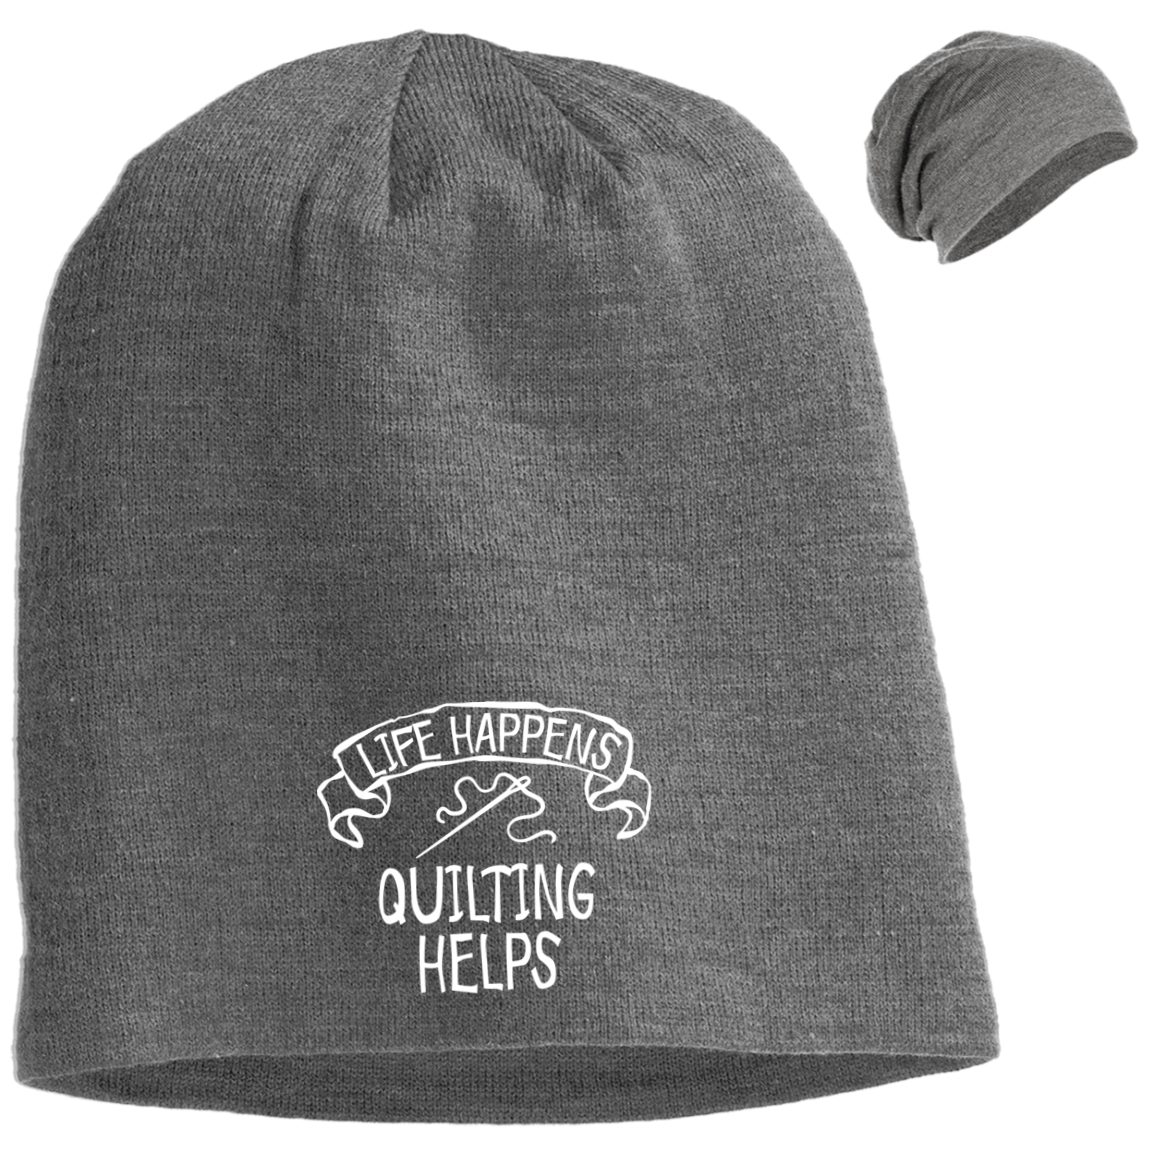 Life Happens - Quilting Helps Slouch Beanie